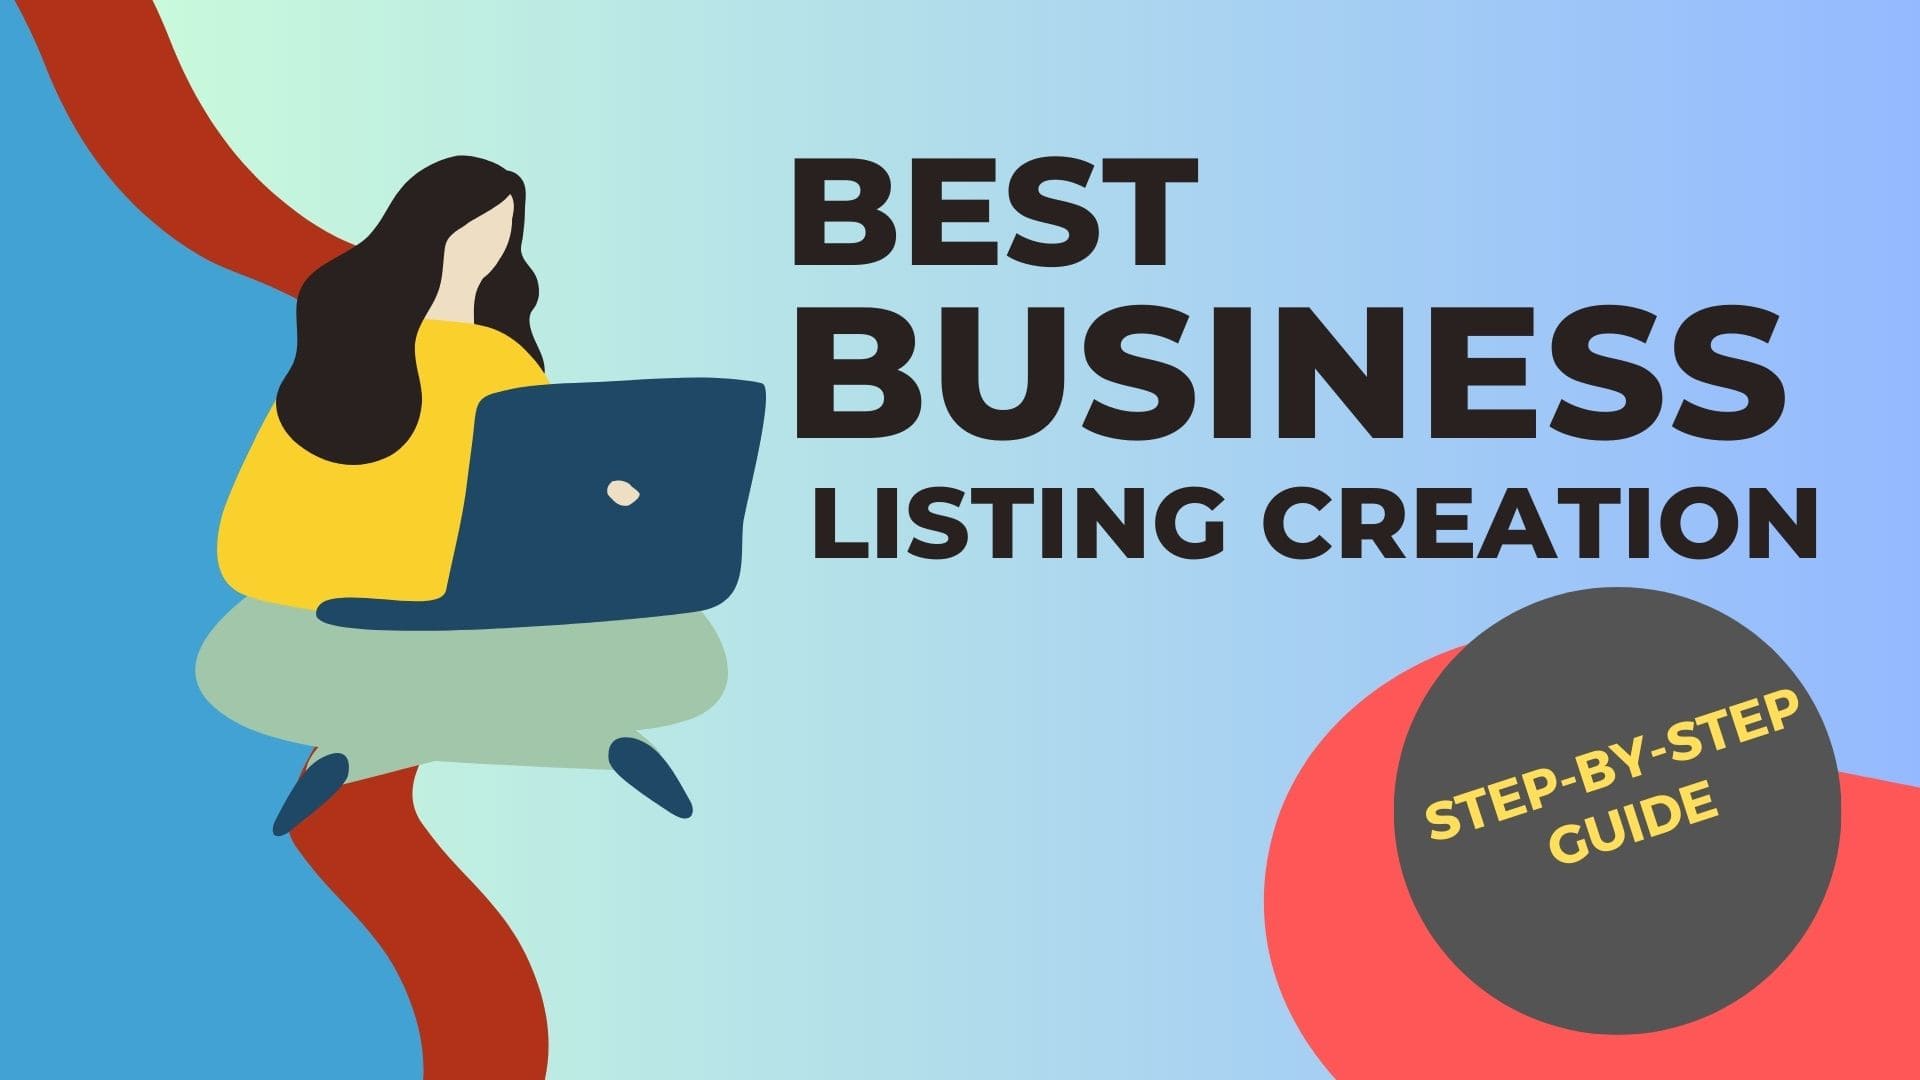 Best Business Listing Creation Step-by-step Guide